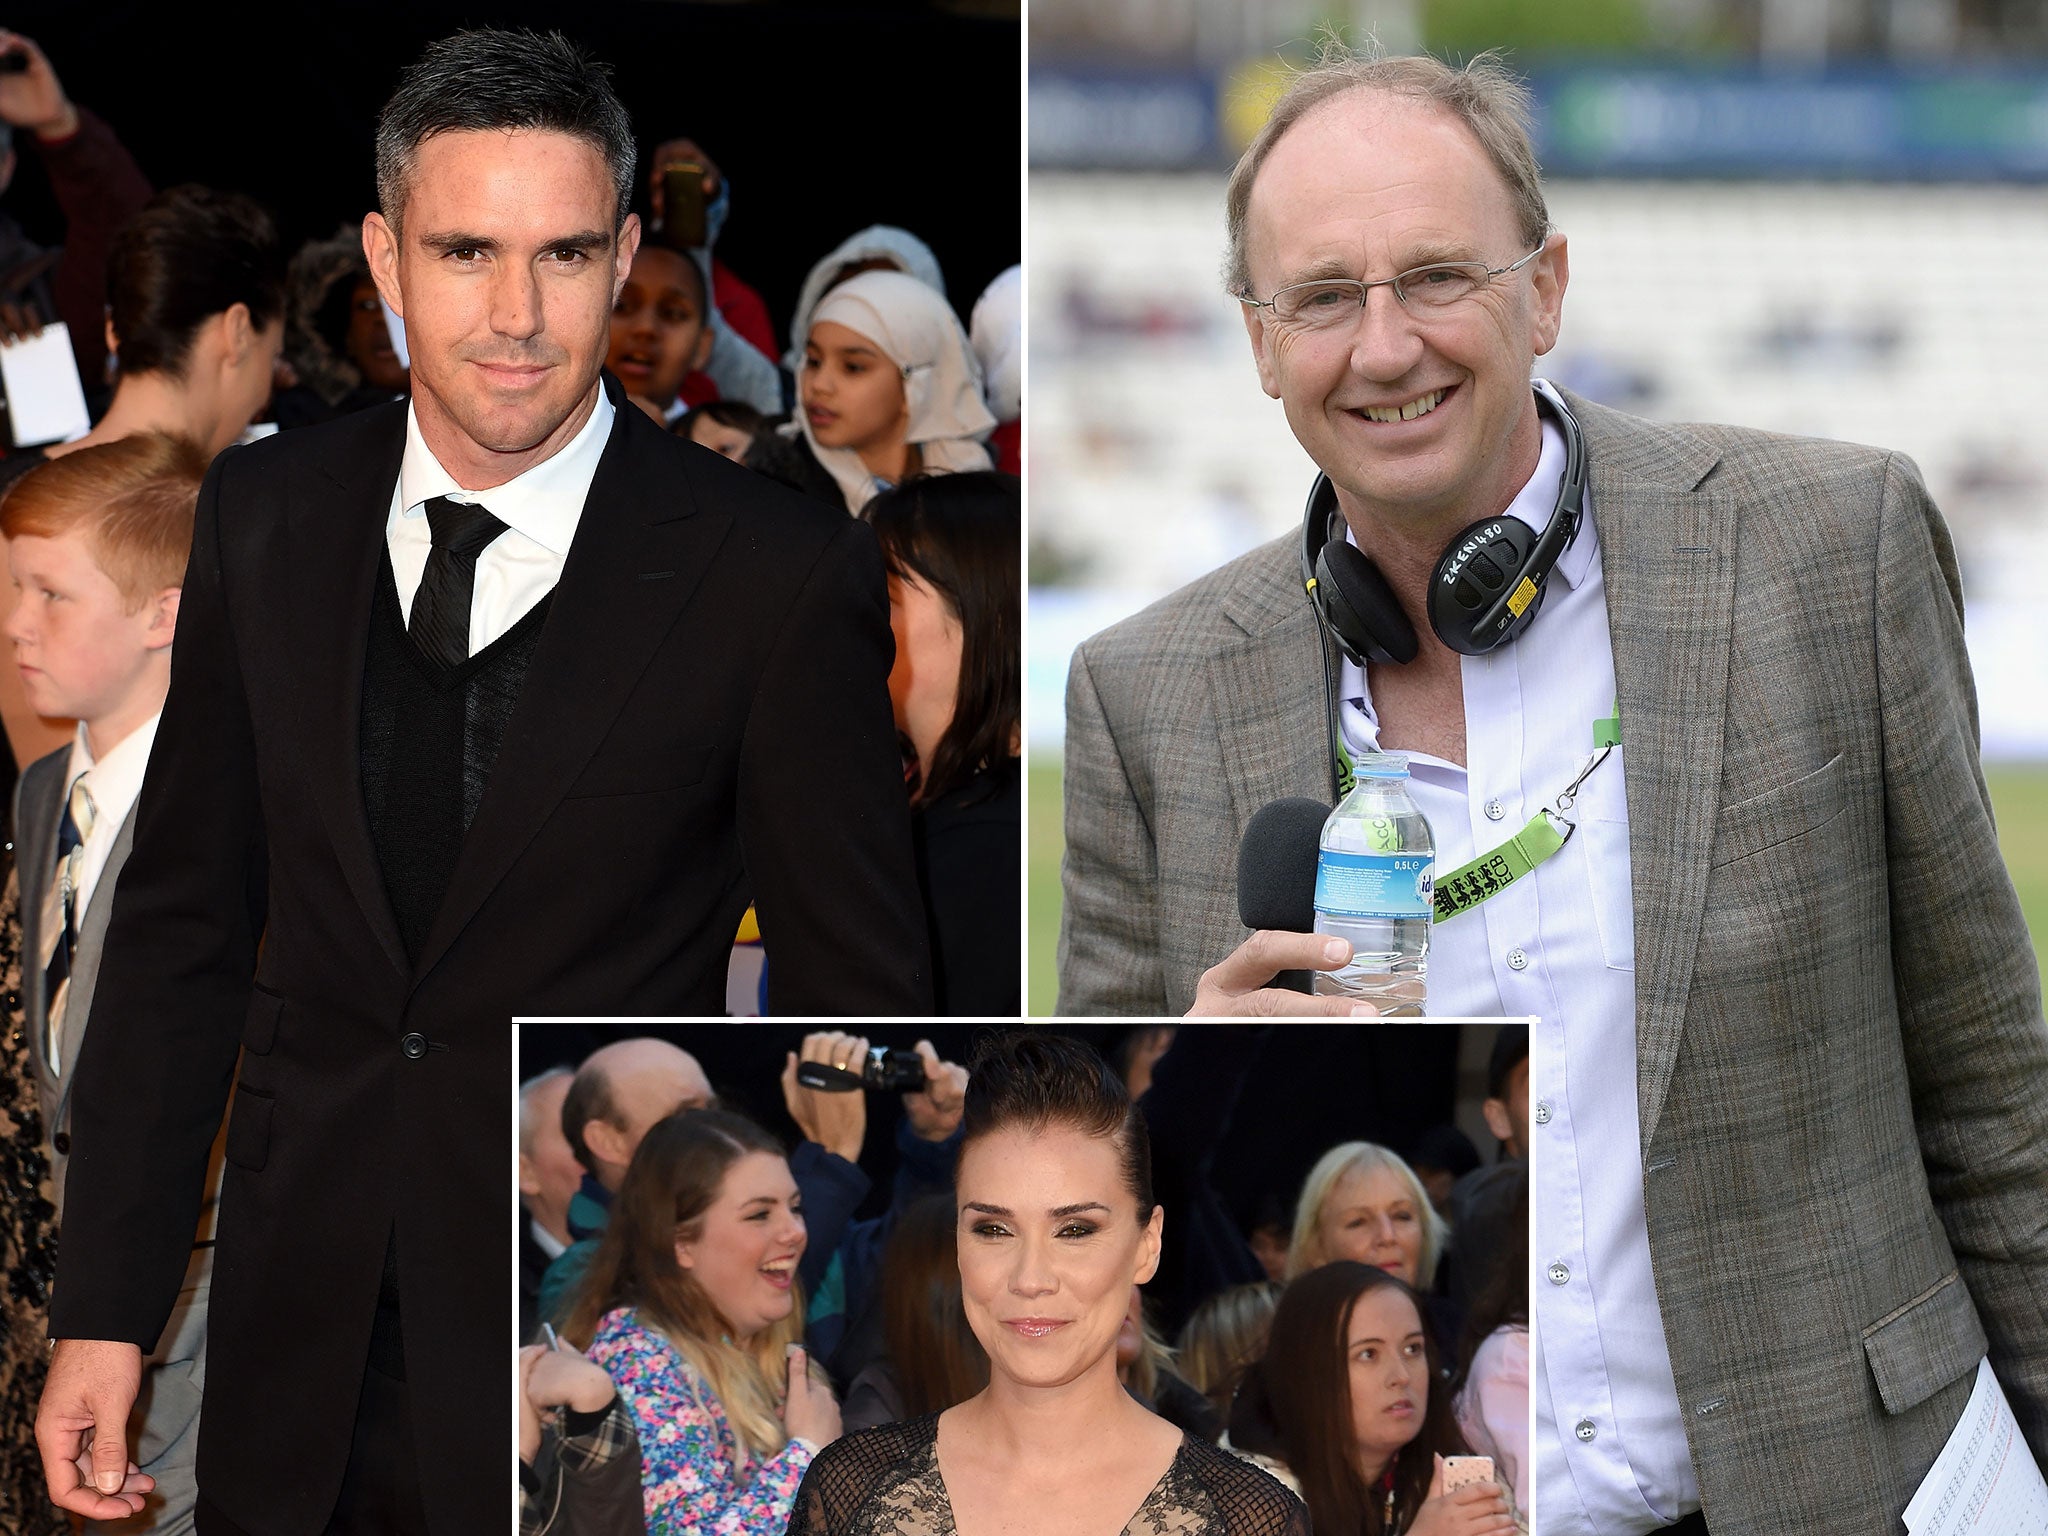 Kevin Pietersen, Jonathan Agnew and Jessica Taylor